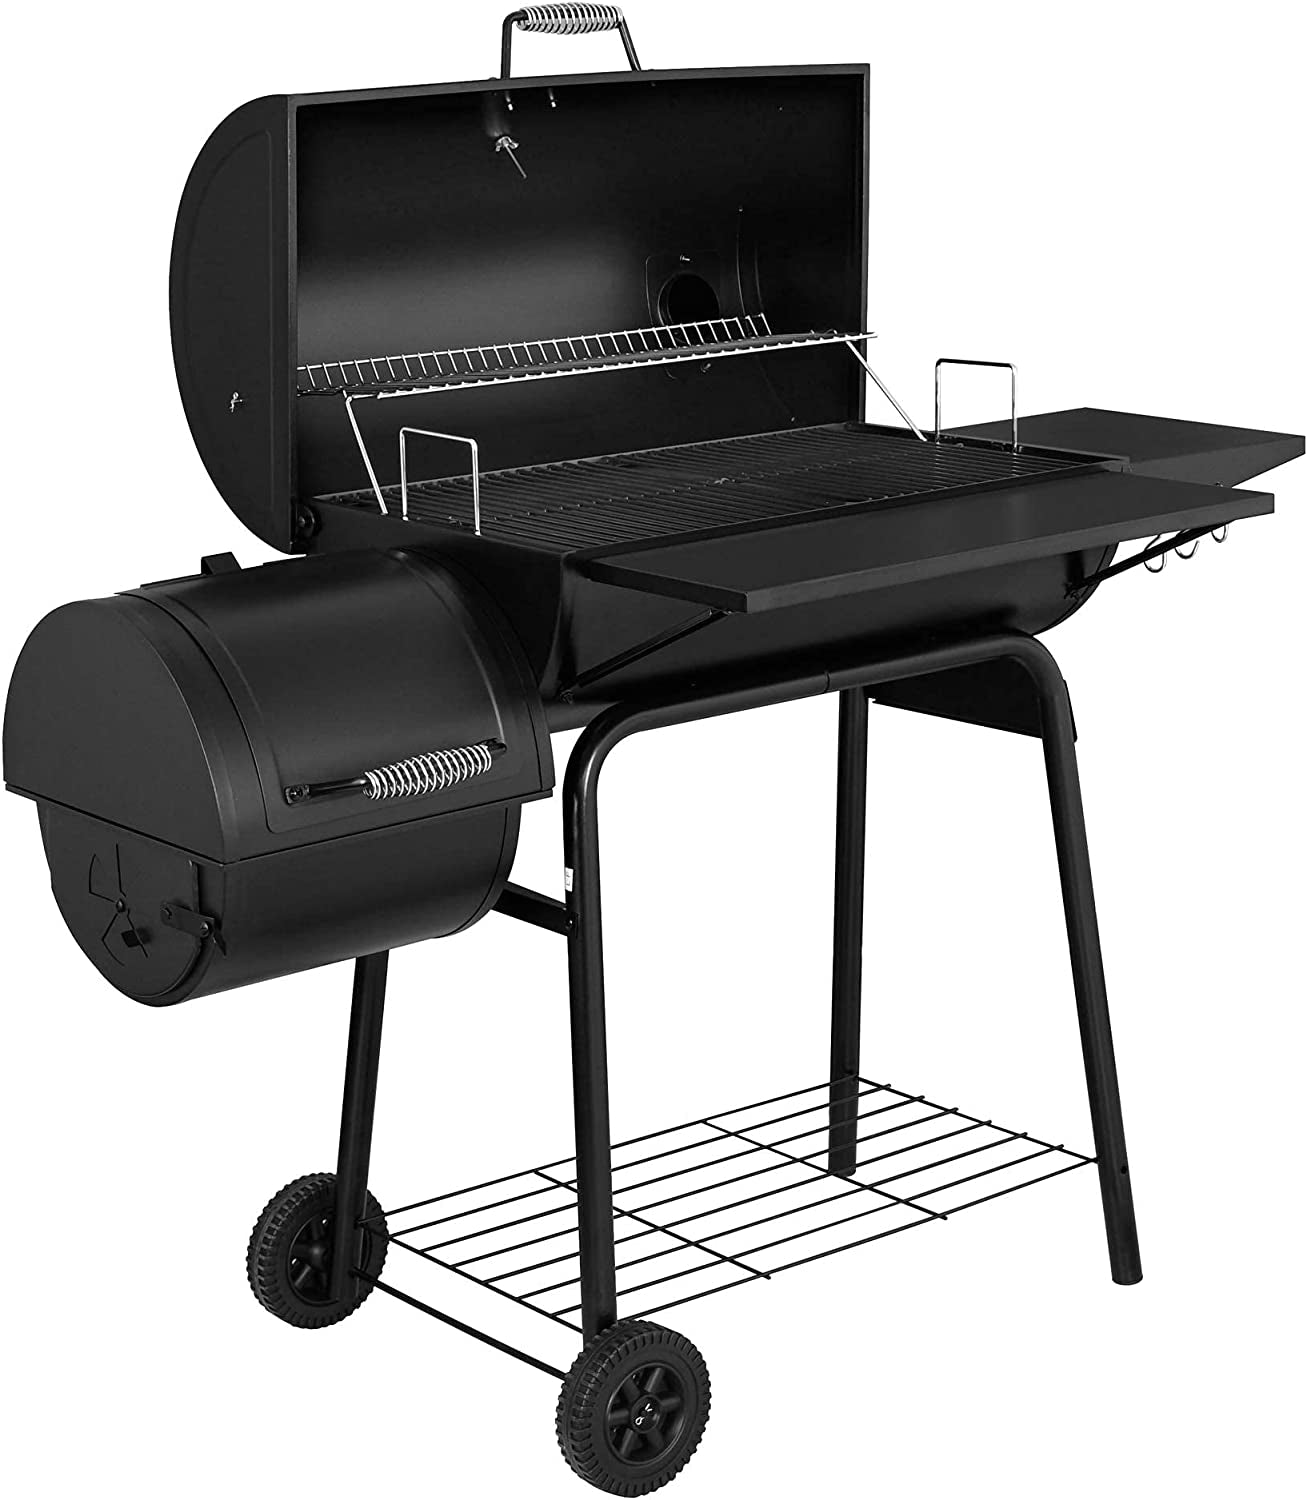 Outdoor Camping Charcoal Grill Offset Smoker with Cover - 811 Square Inches - Black